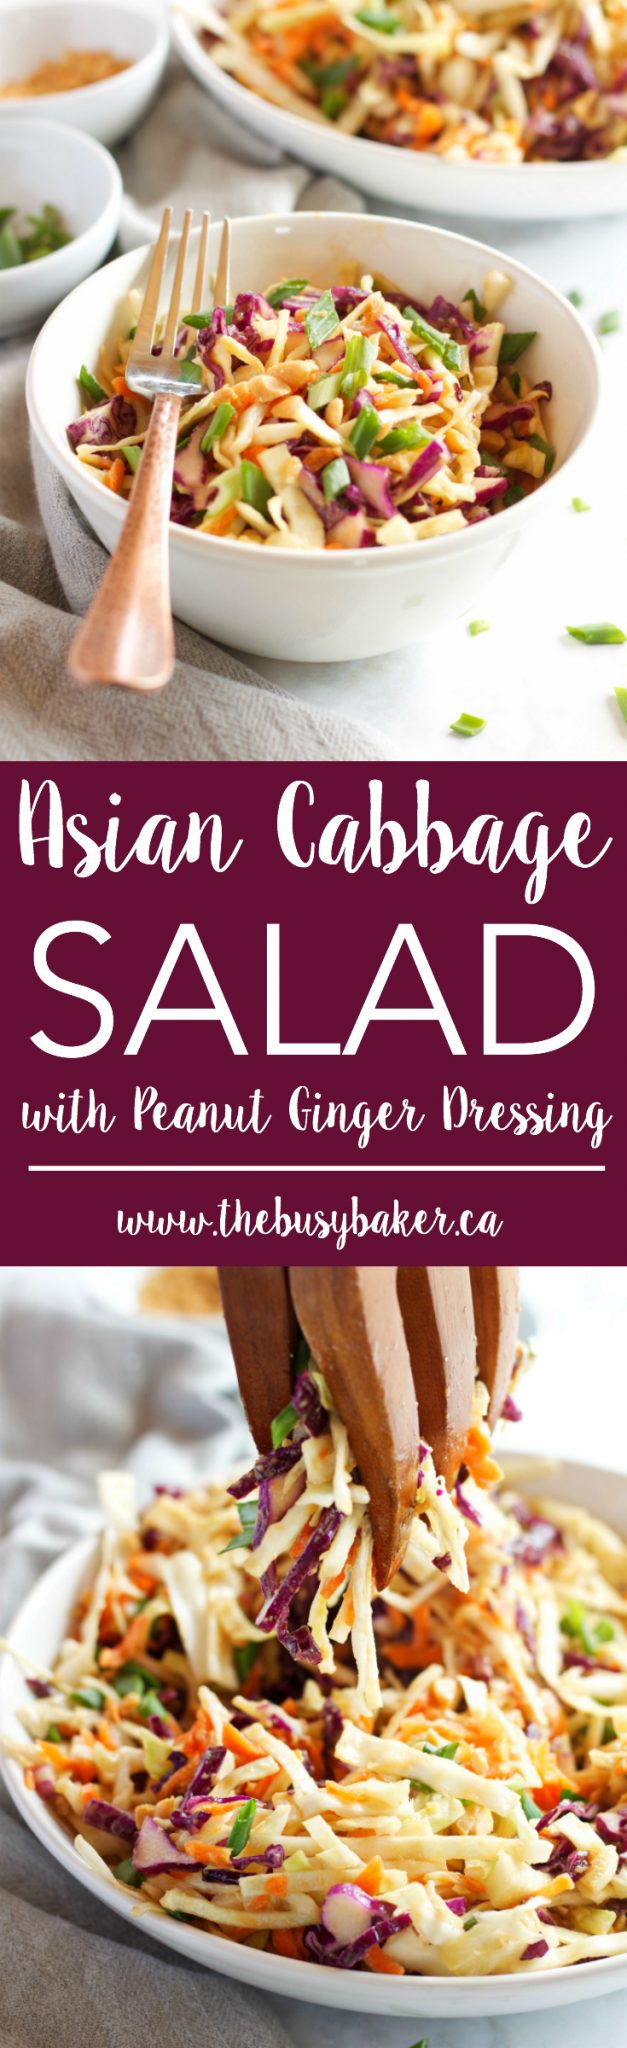 This Asian Cabbage Salad with Ginger Peanut Dressing is a healthy, easy to make Thai inspired side dish made from simple, wholesome ingredients! Recipe from thebusybaker.ca! via @busybakerblog